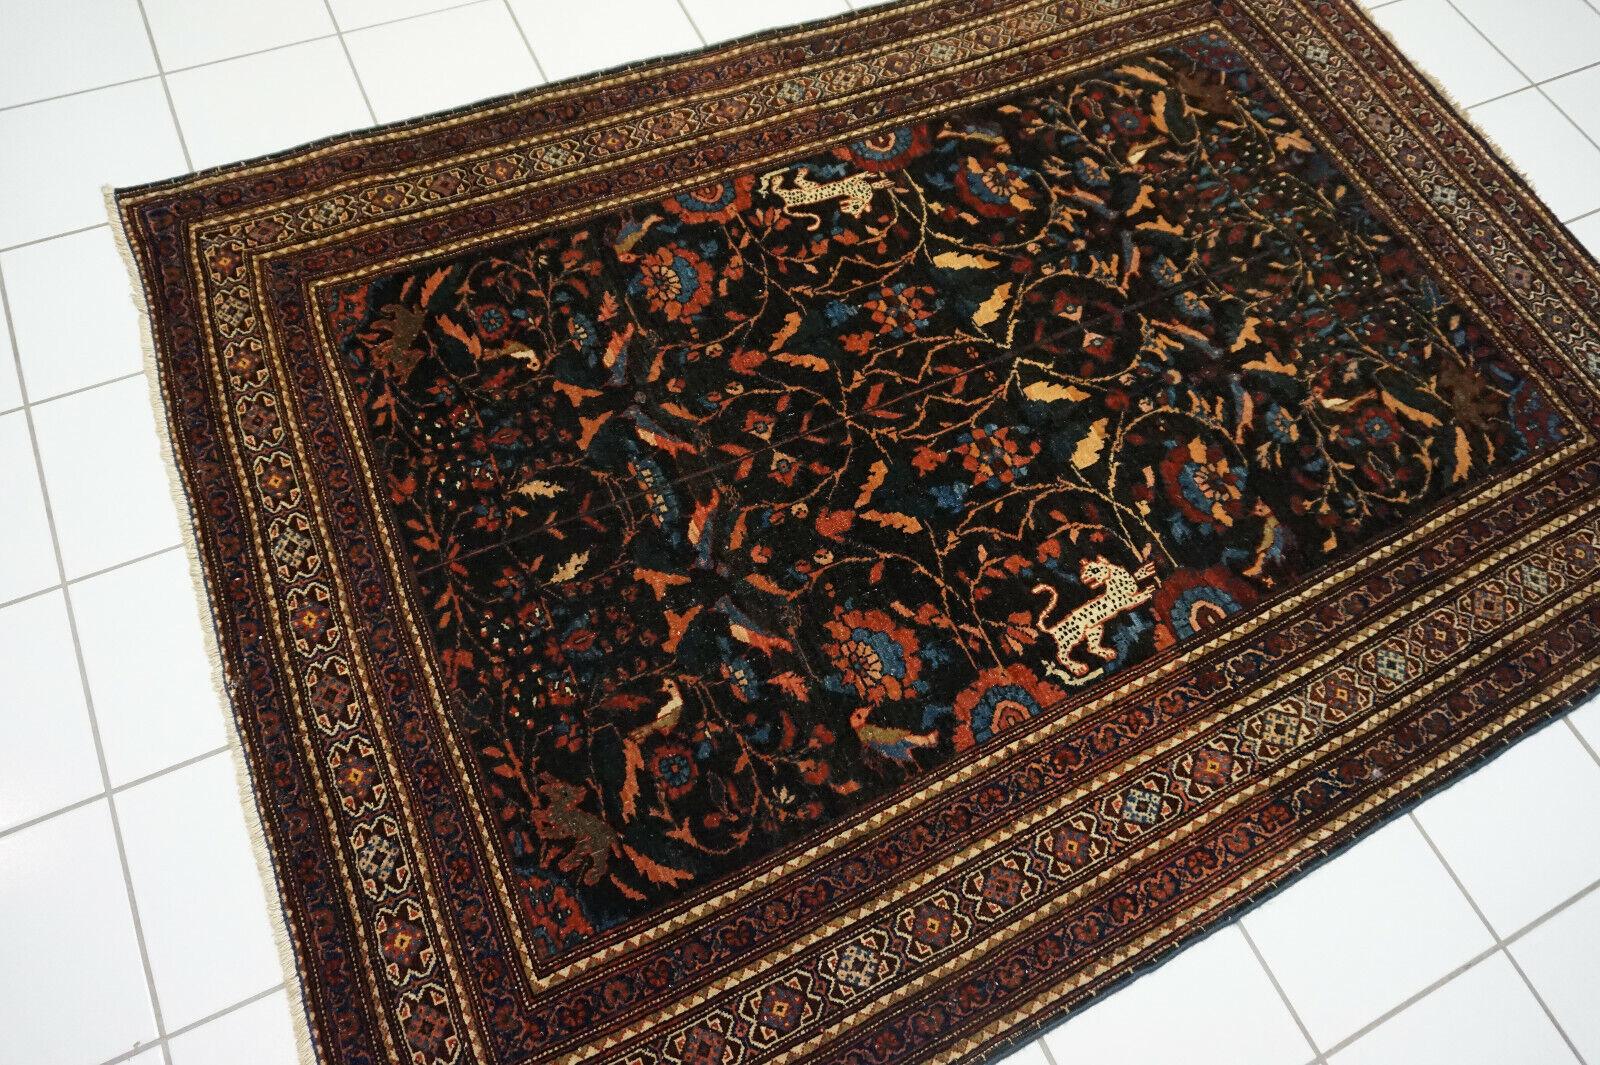 Early 20th Century Handmade Antique Persian Tehran Rug 3.6' x 5.1', 1920s - 1D59 For Sale